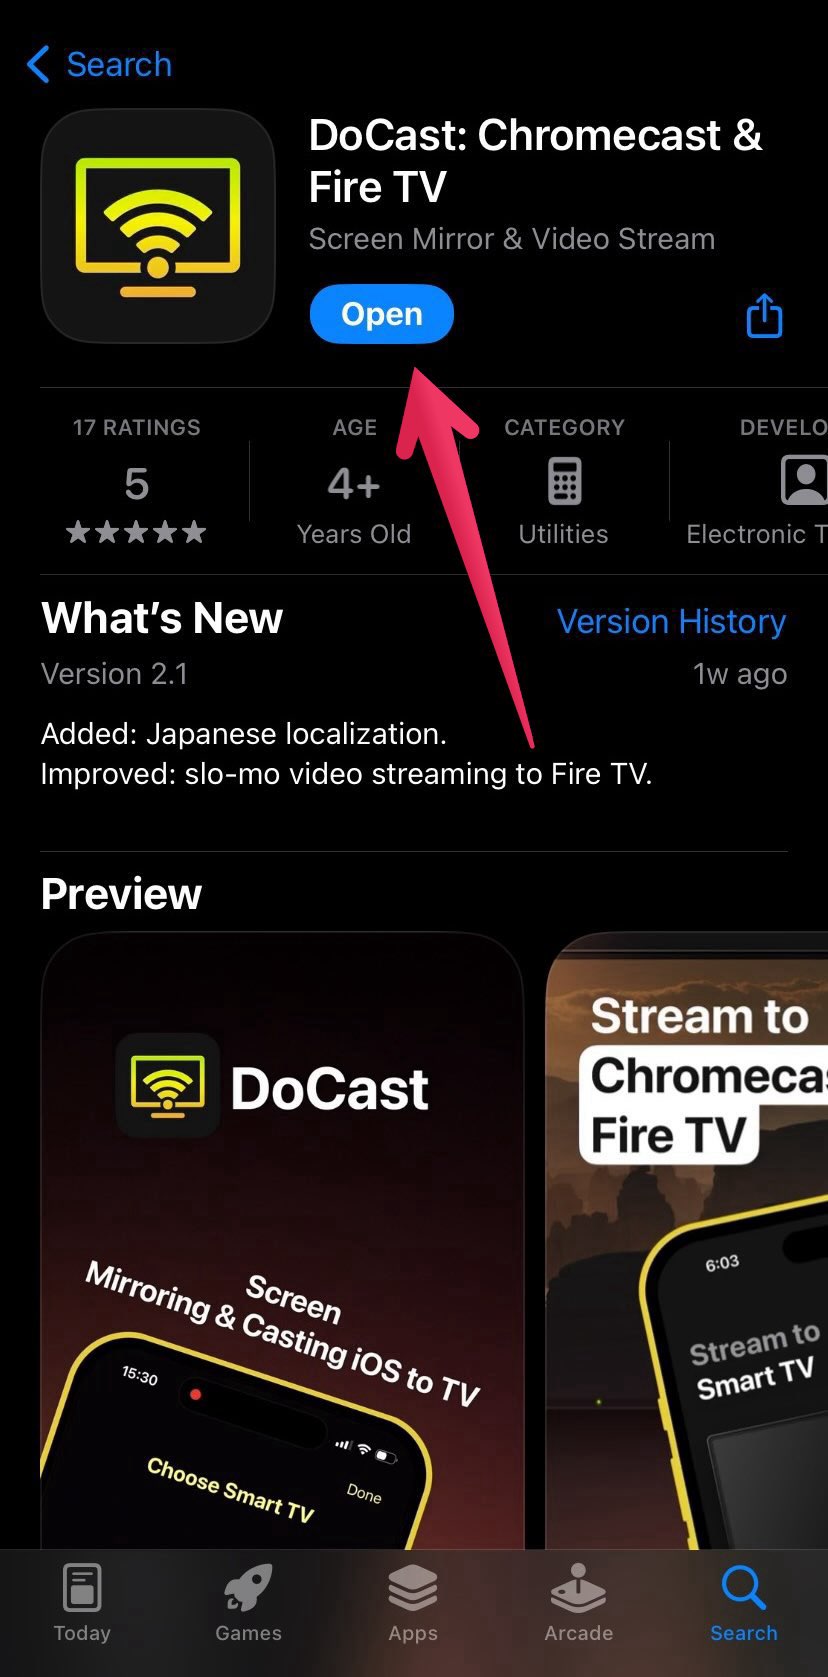 Download DoCast from the App Store on your iPhone